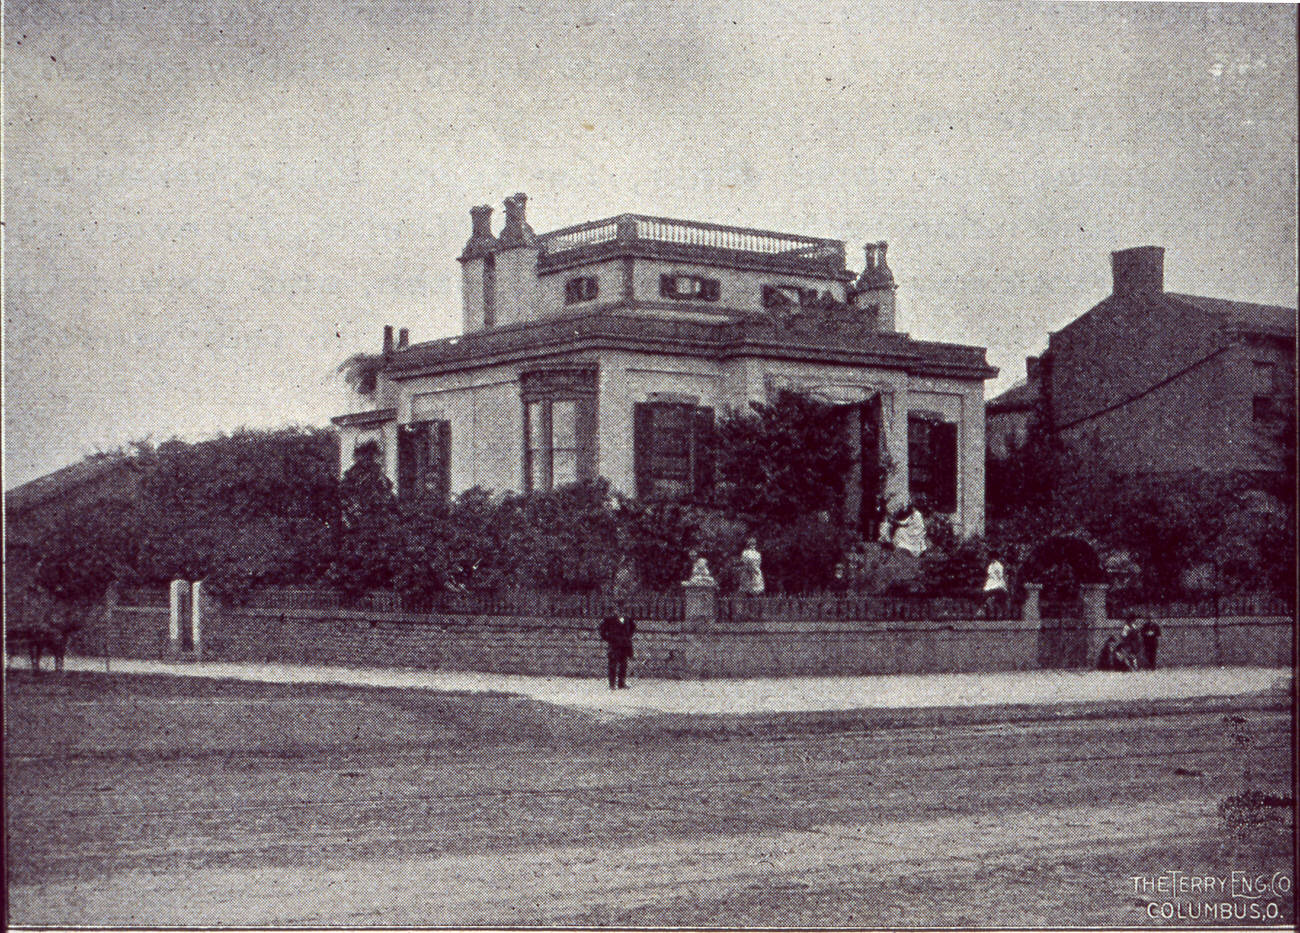 George W. Foster house at Mound and High streets, demolished in the 1880s for business development, Circa 1898.